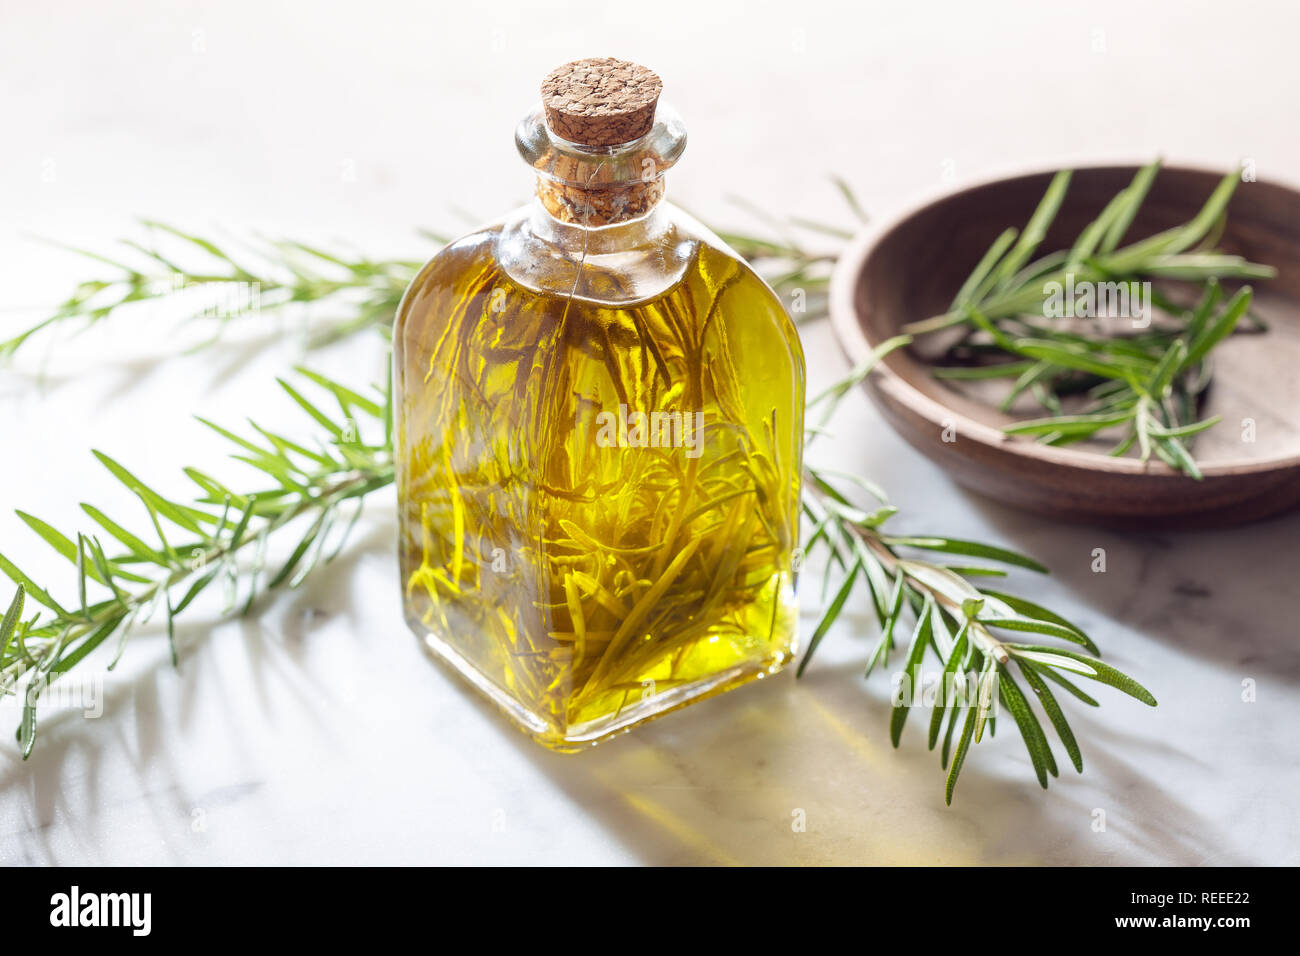 Rosemary oil. Olive oil with rosemary herbs for cooking. Infused oil with aromatic herbs Stock Photo